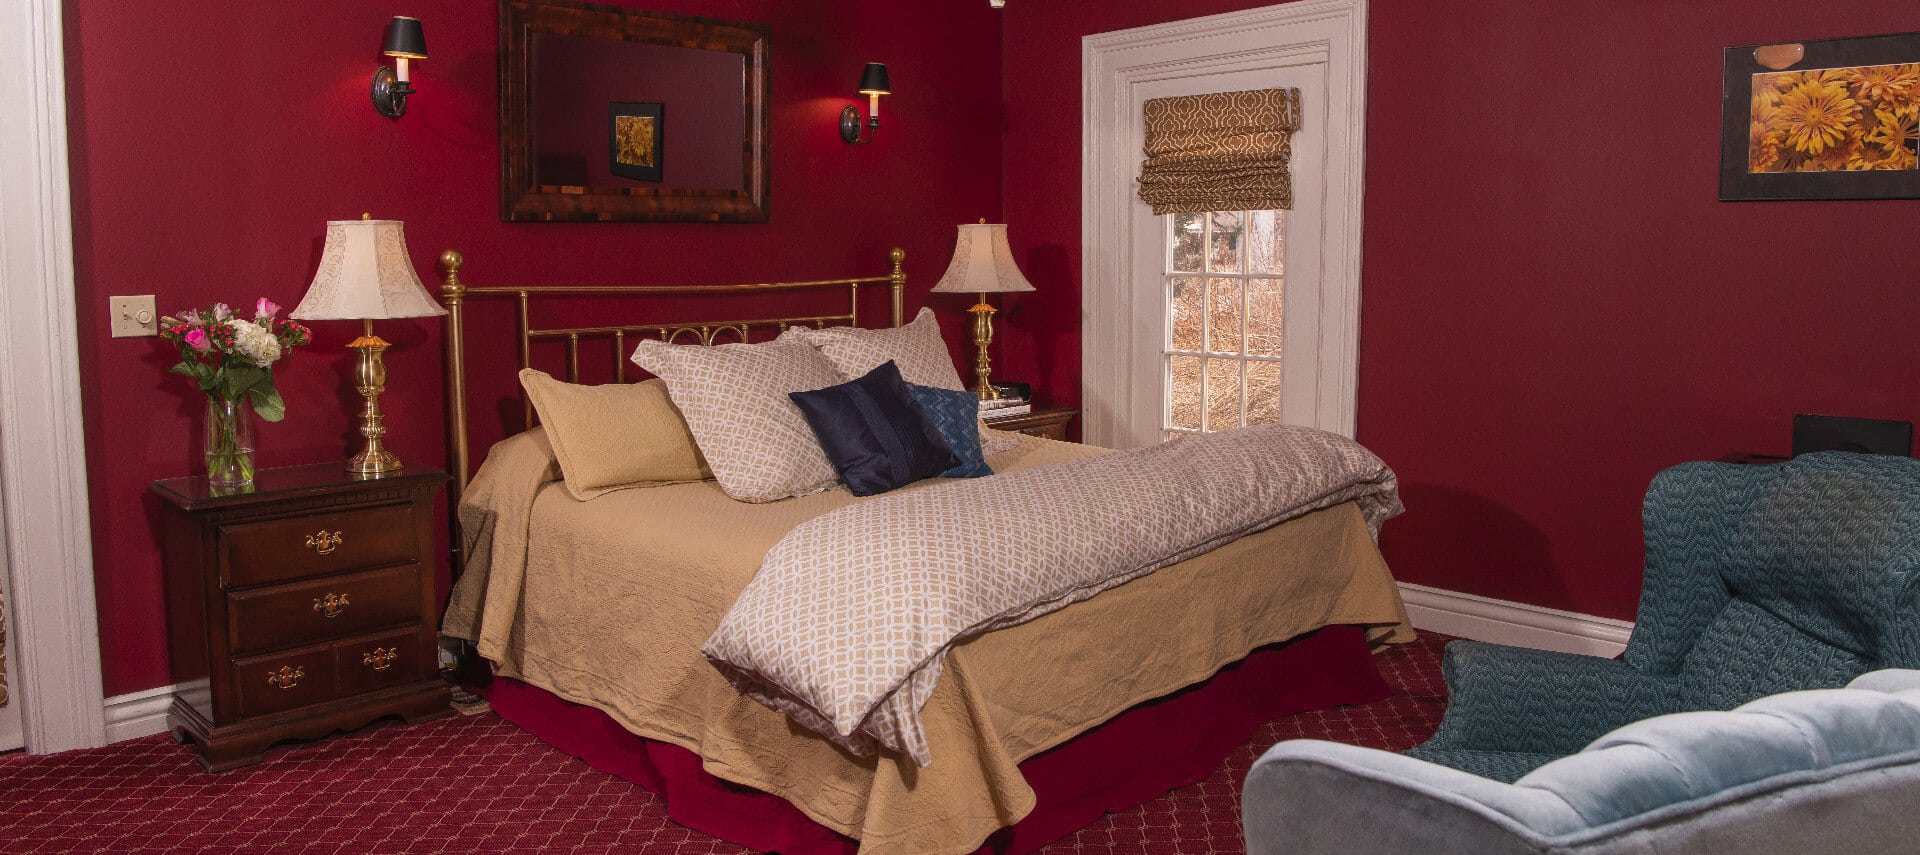 King sized brass bed in a red wallpaper and carpet in a guestroom that has a seating area with two blue chairs.